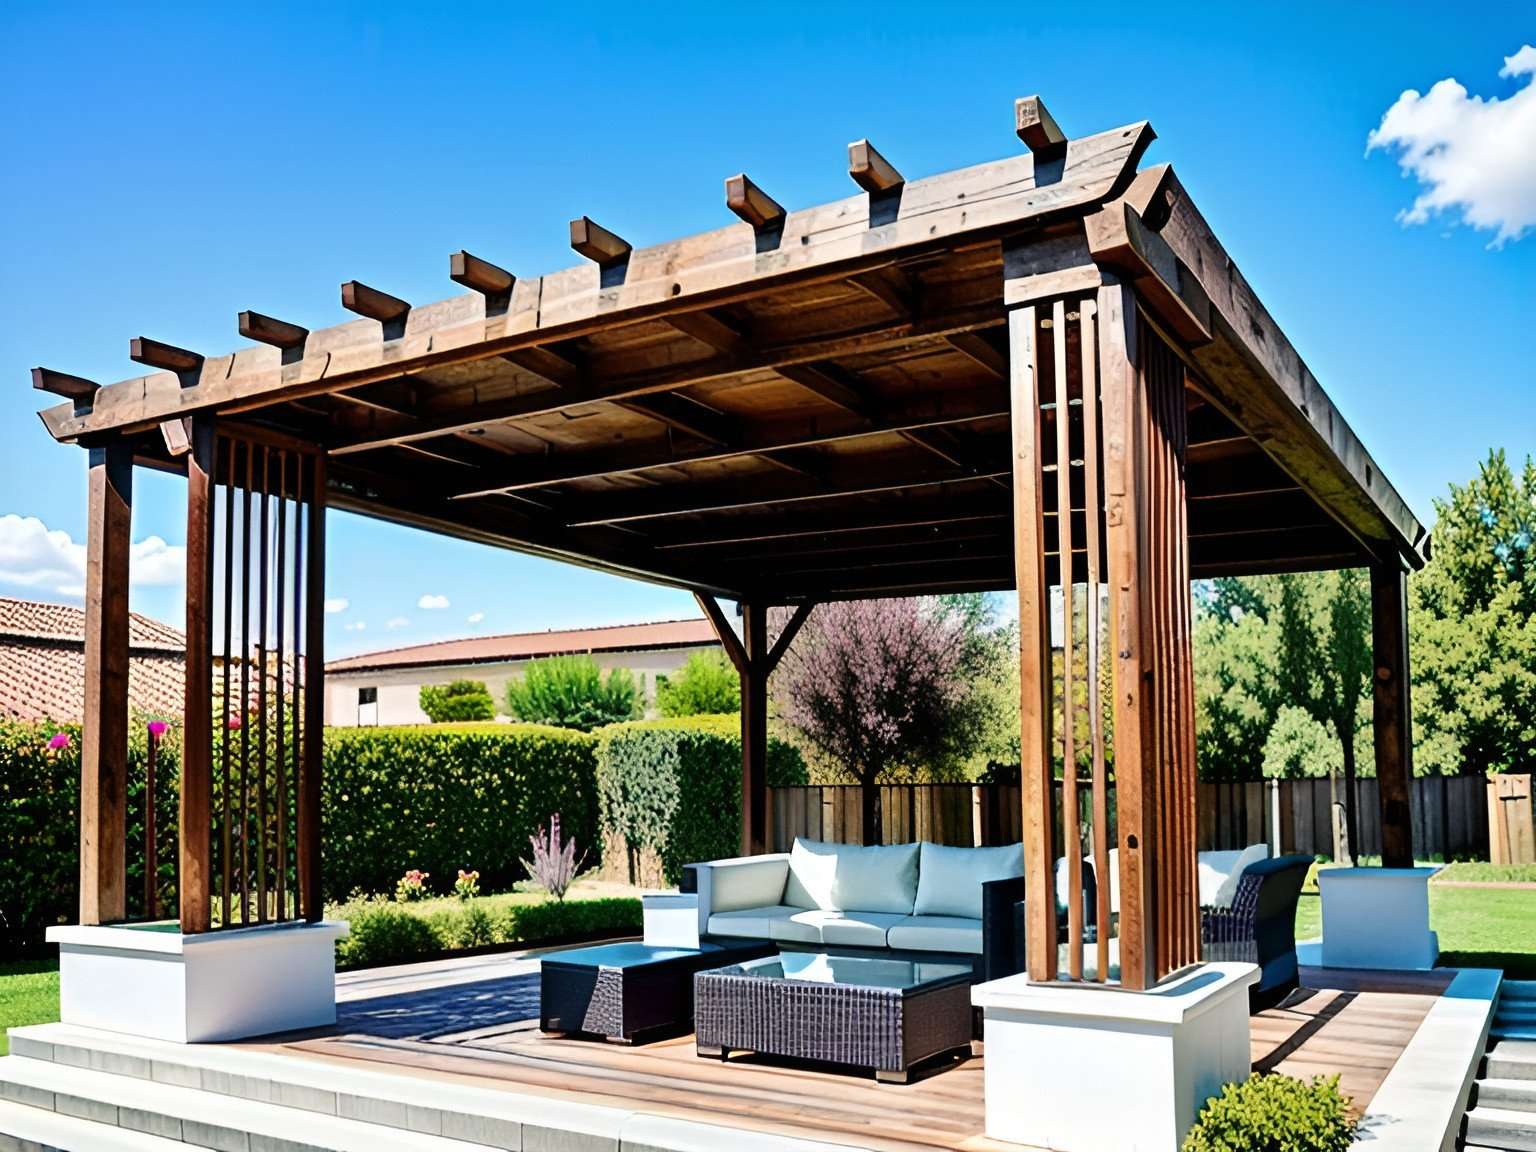 Modern pergola with roof connected to house, landscaped backyard, outdoor living area